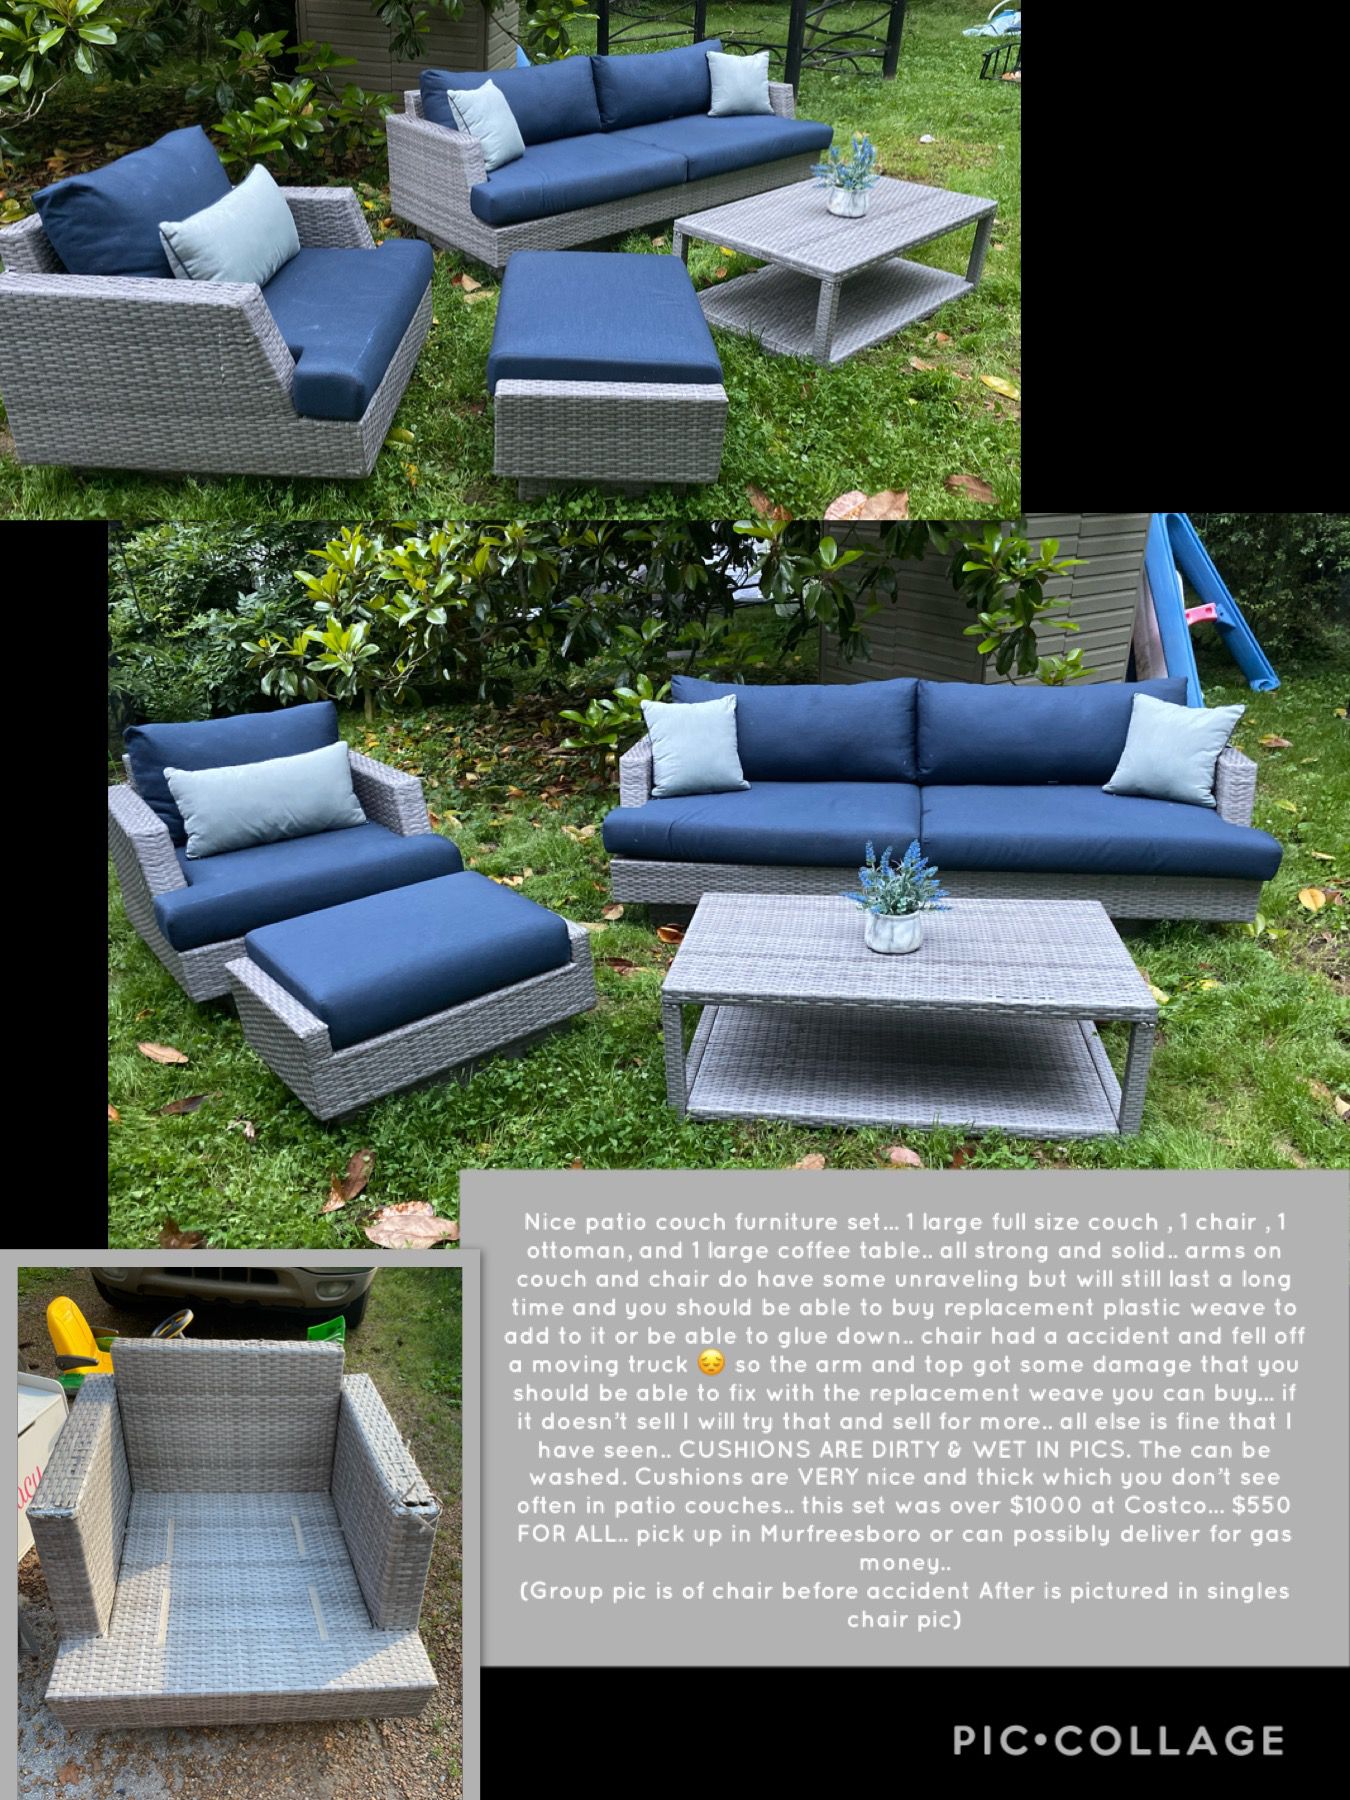 ** FIRM ON PRICE IT IS WORTH WHAT IM ASKING... PLEASW ONLY MESSAGE IF YOU ARW SERIOUS AND READ ALL INFO.. thanks *** Nice patio couch furniture set..